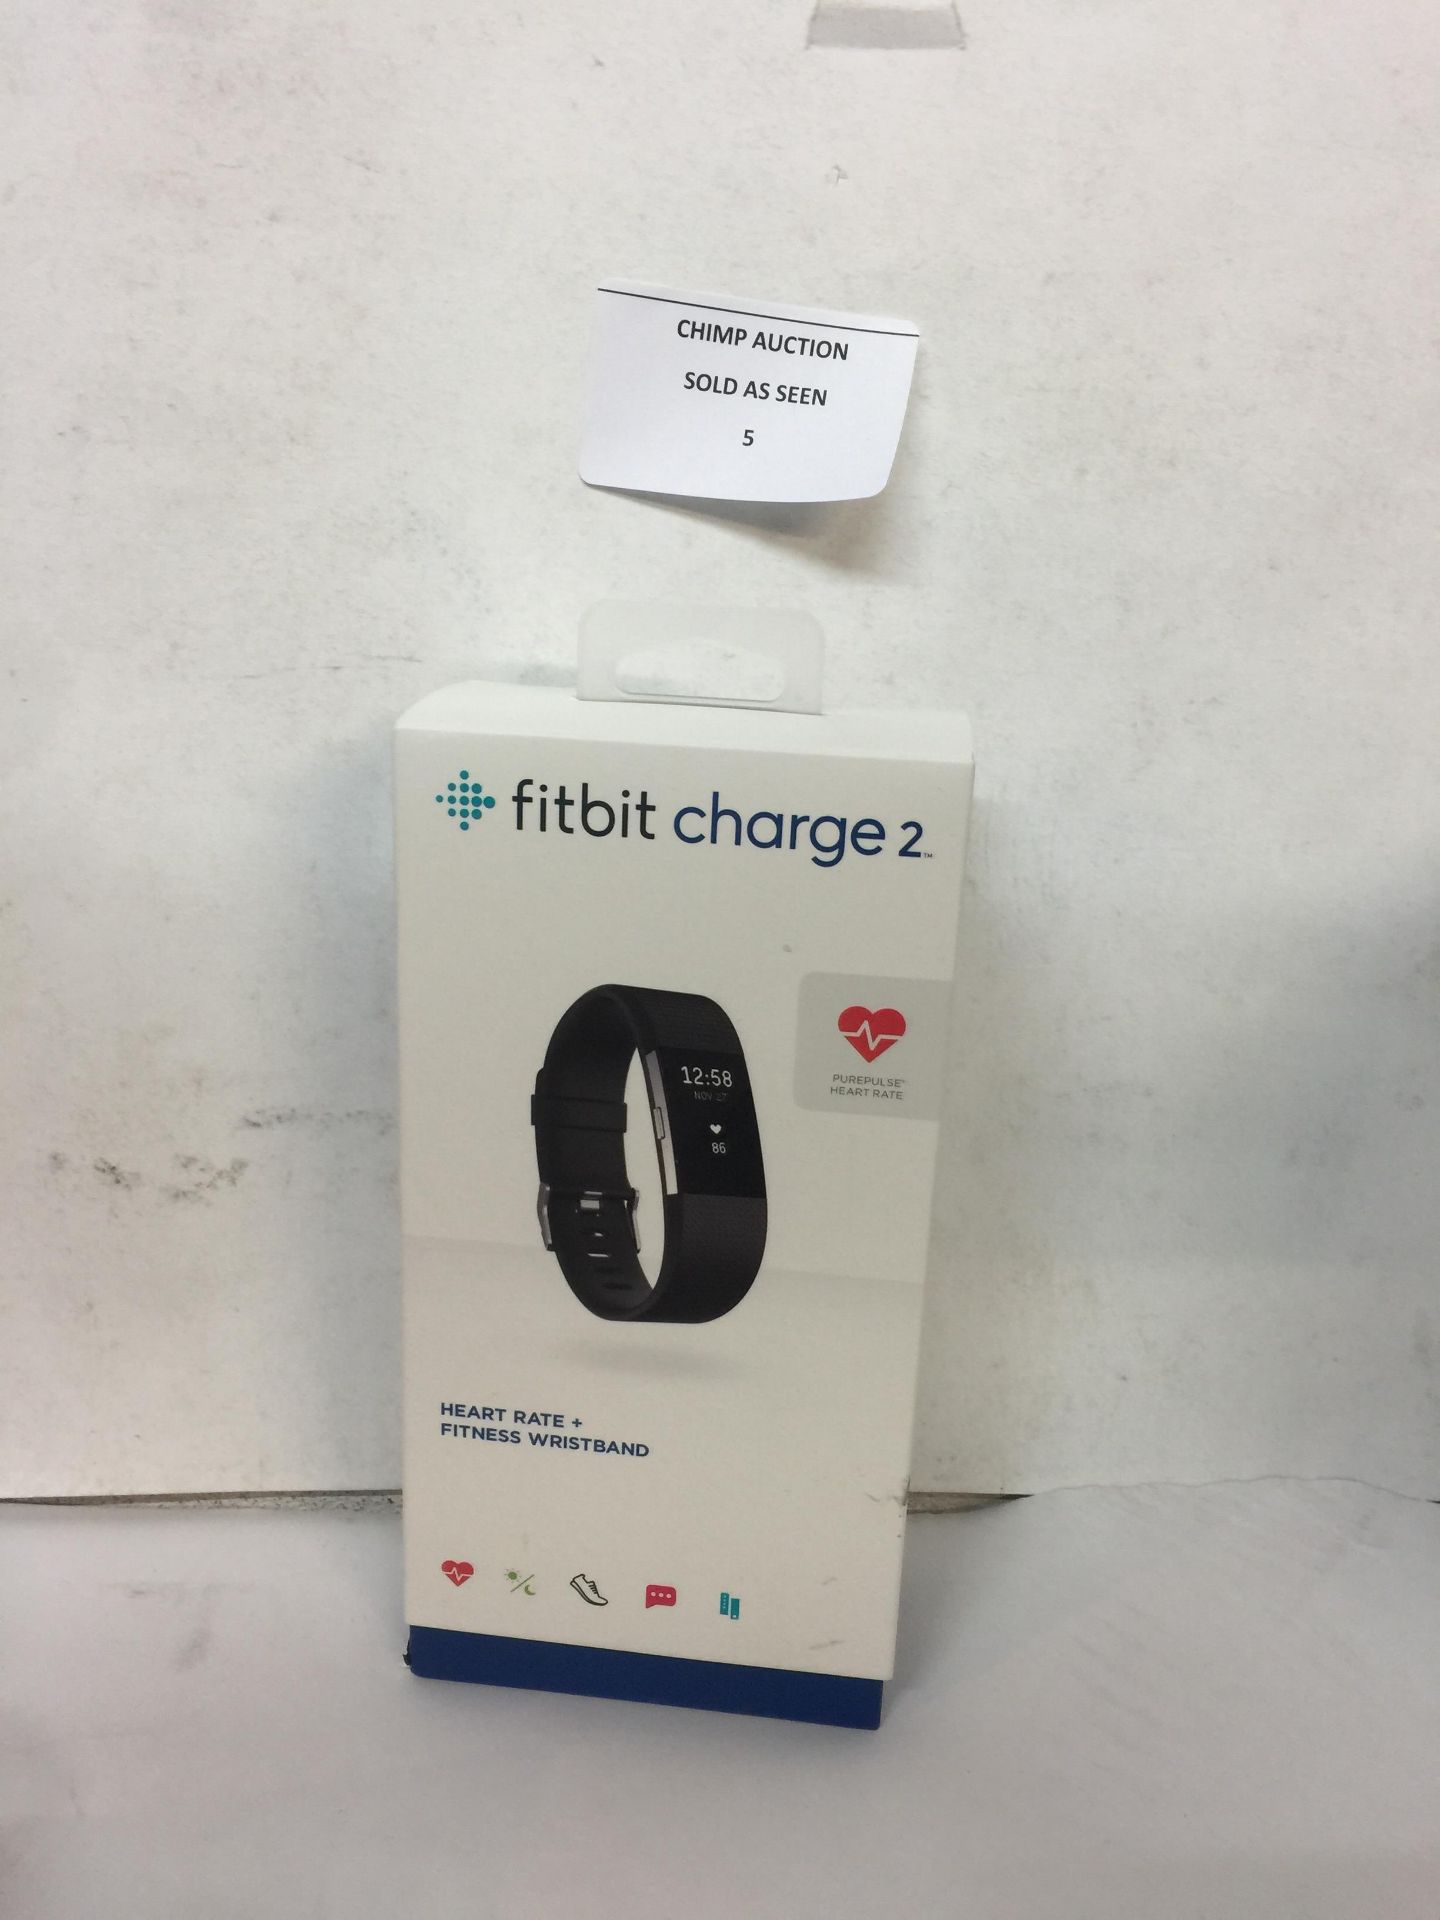 FITBIT CHARGE 2 SMART WATCH RRP £129.99.